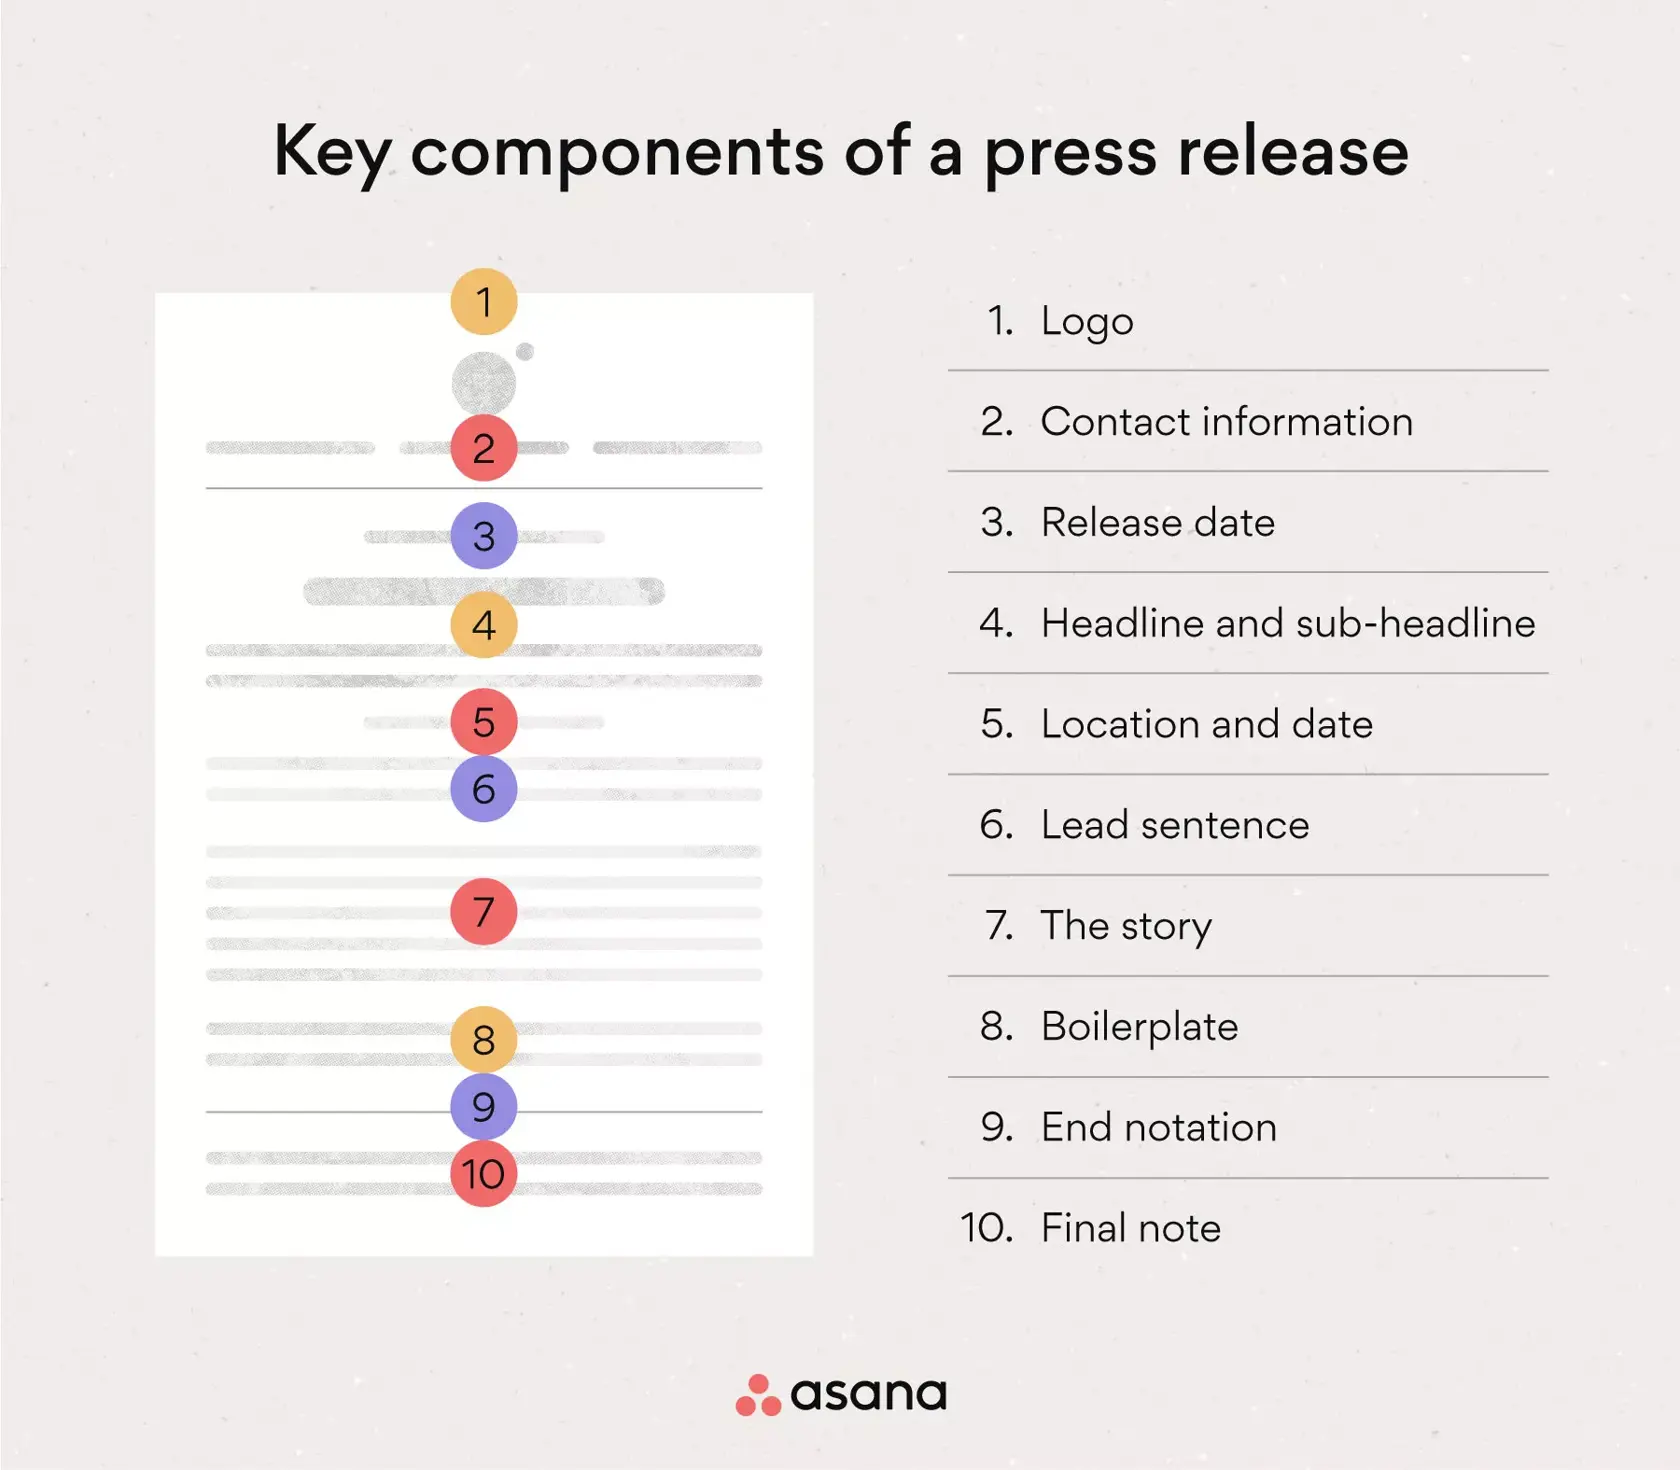 [inline illustration] 10 key components of a press release (infographic)